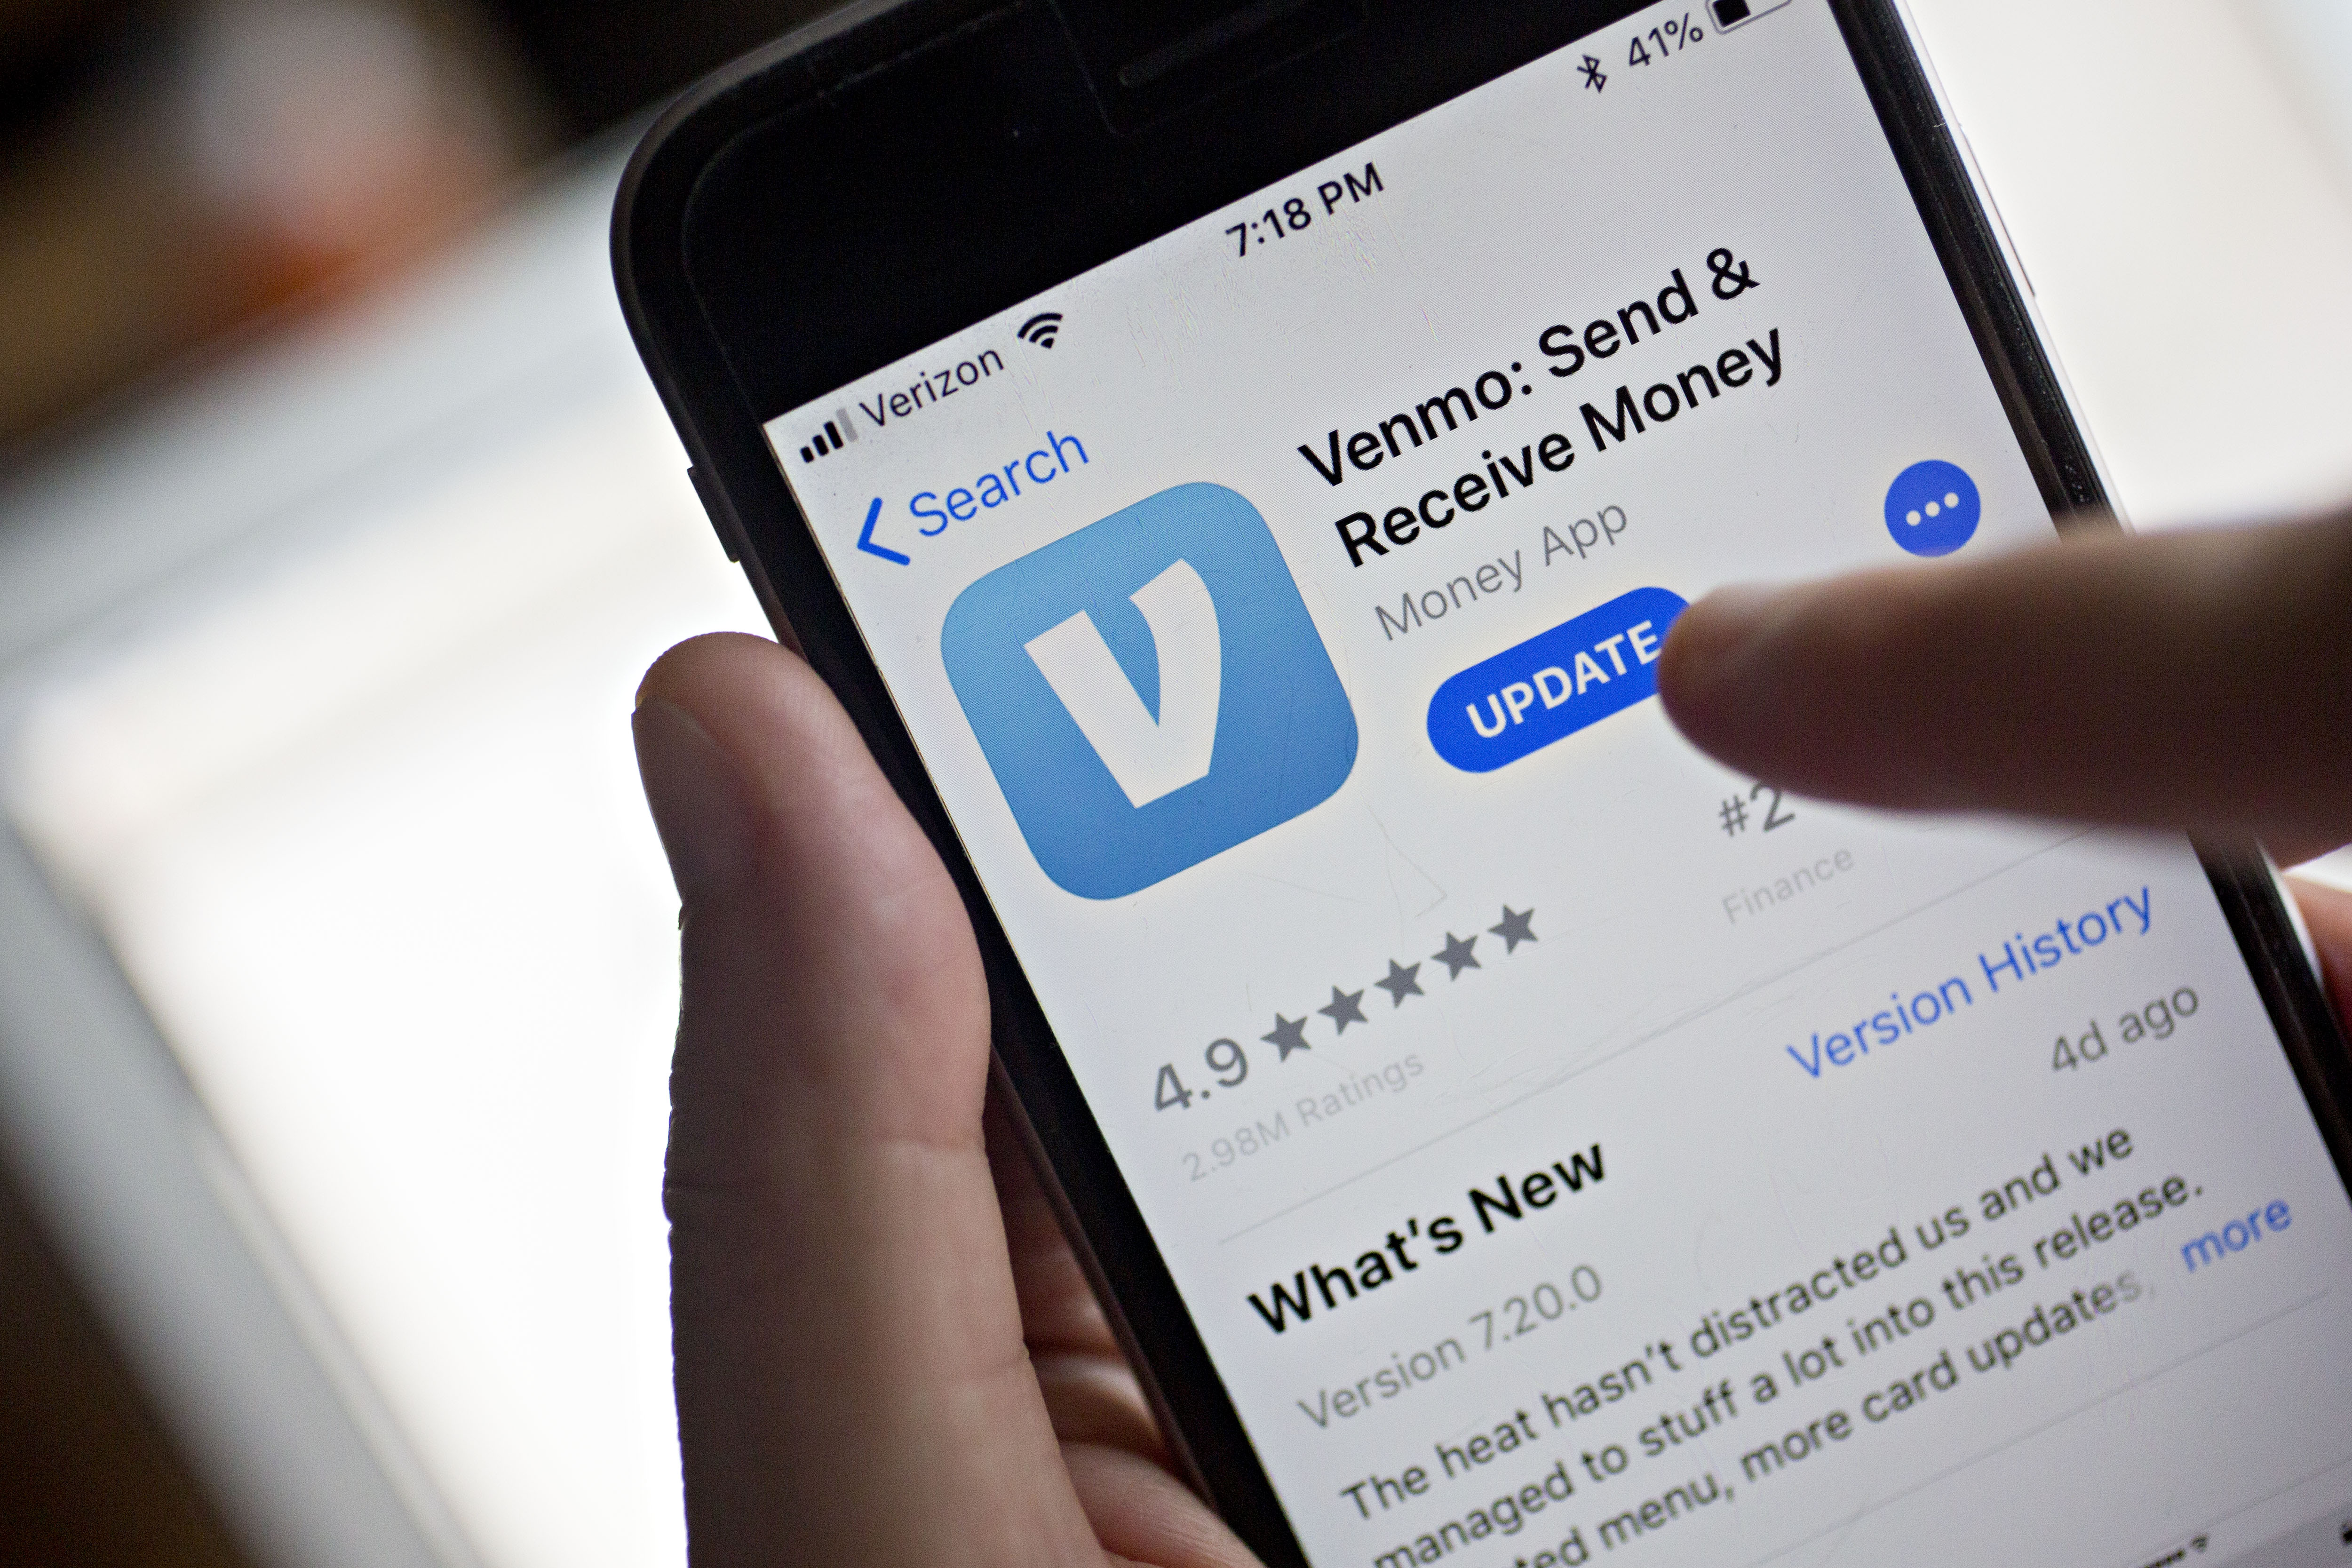 Venmo warns of scam targeting users: What it is and how to avoid losing  money – NBC New York